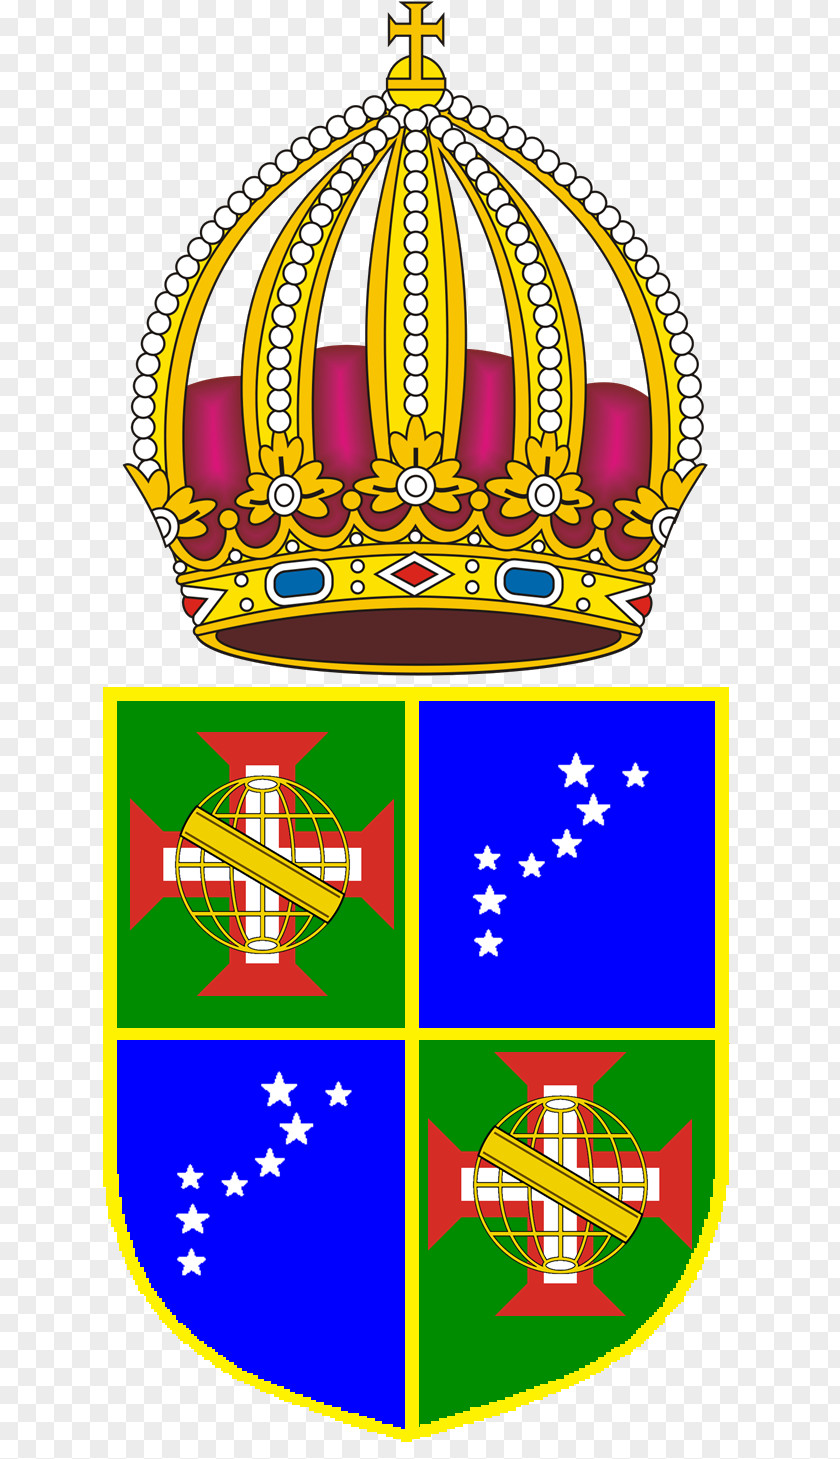 Amazonas Frame Empire Of Brazil Kingdom Portugal Emperor Coat Arms PNG